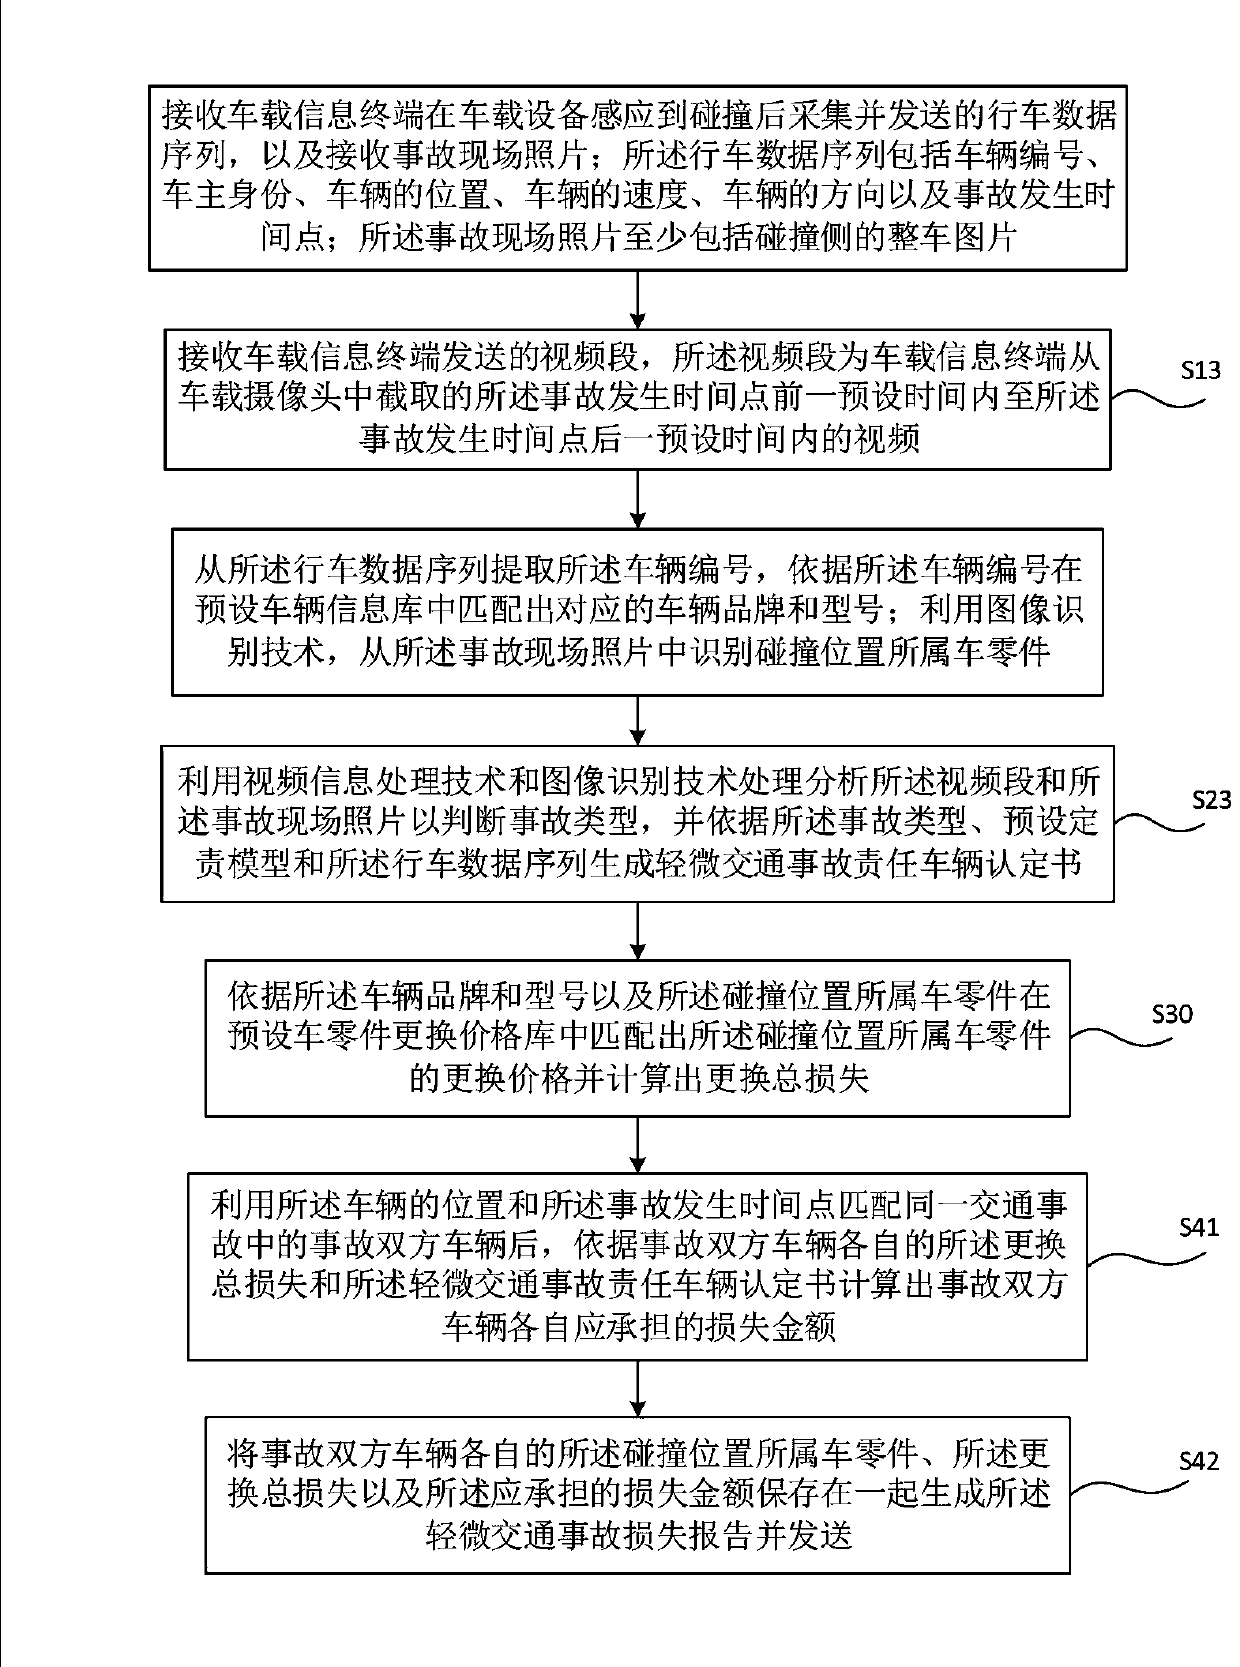 Method and system for assisting rapid damage assessment in slight traffic accident